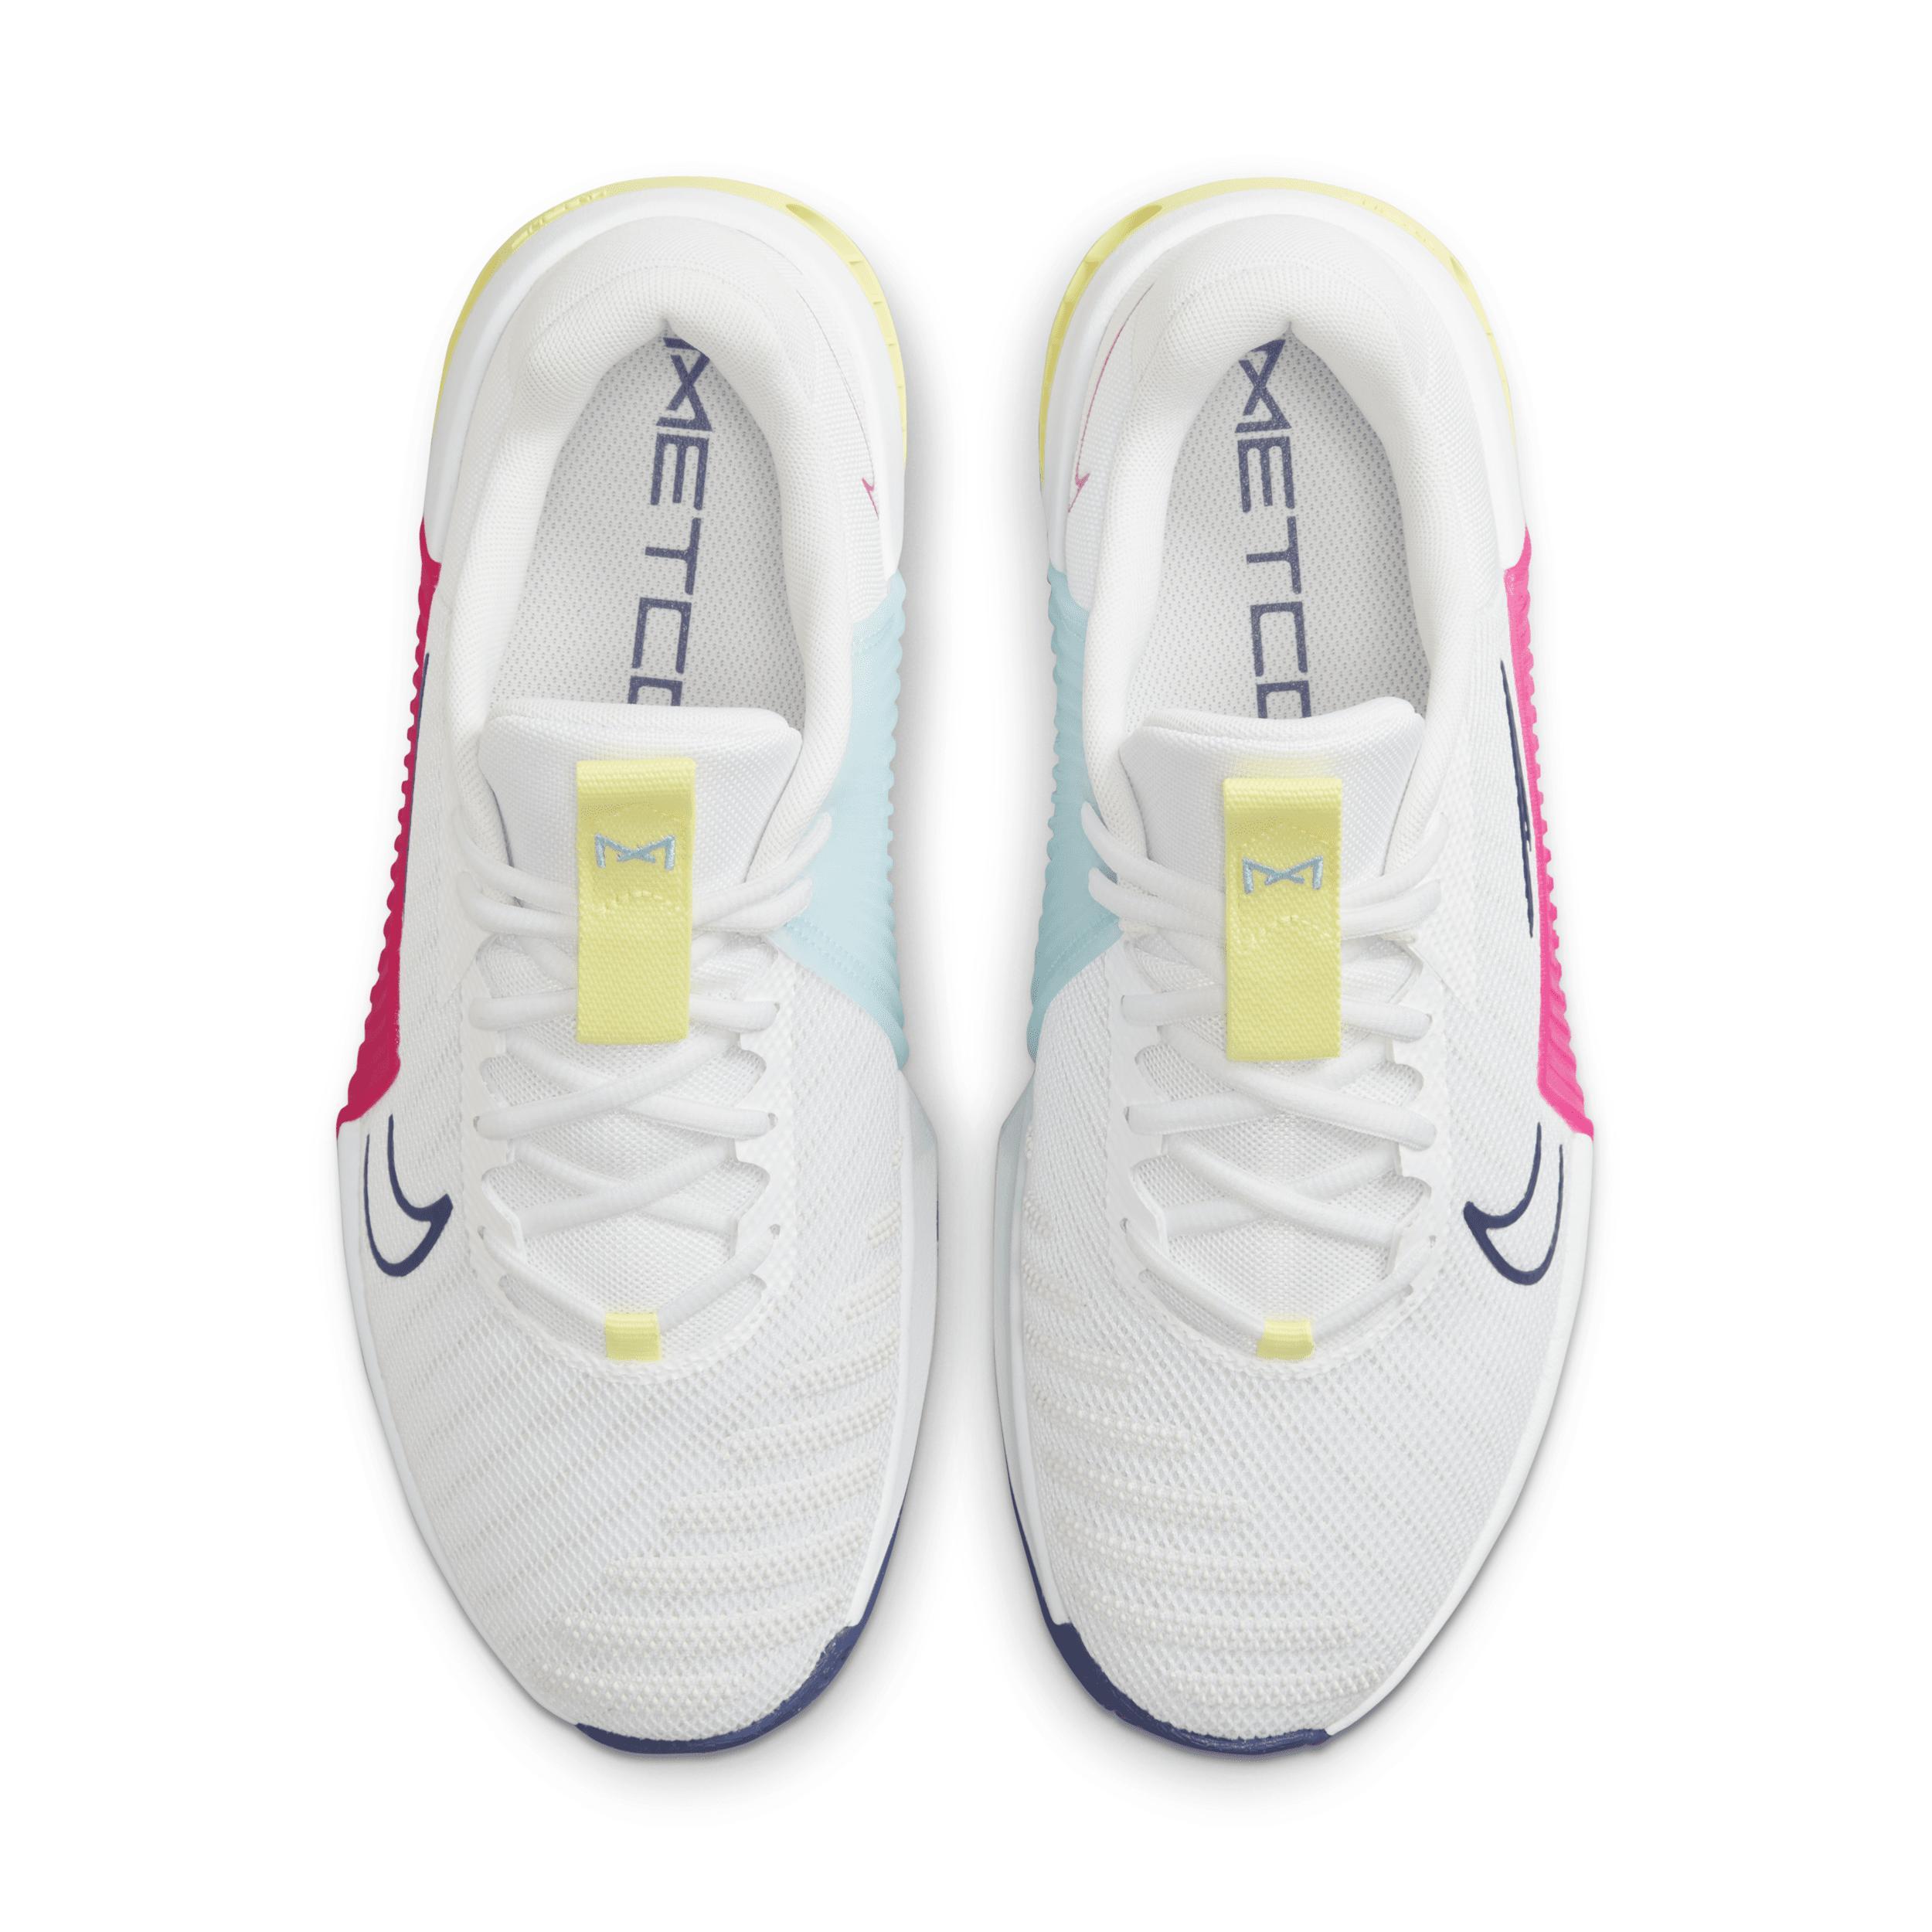 Nike Men's Metcon 9 Workout Shoes Product Image